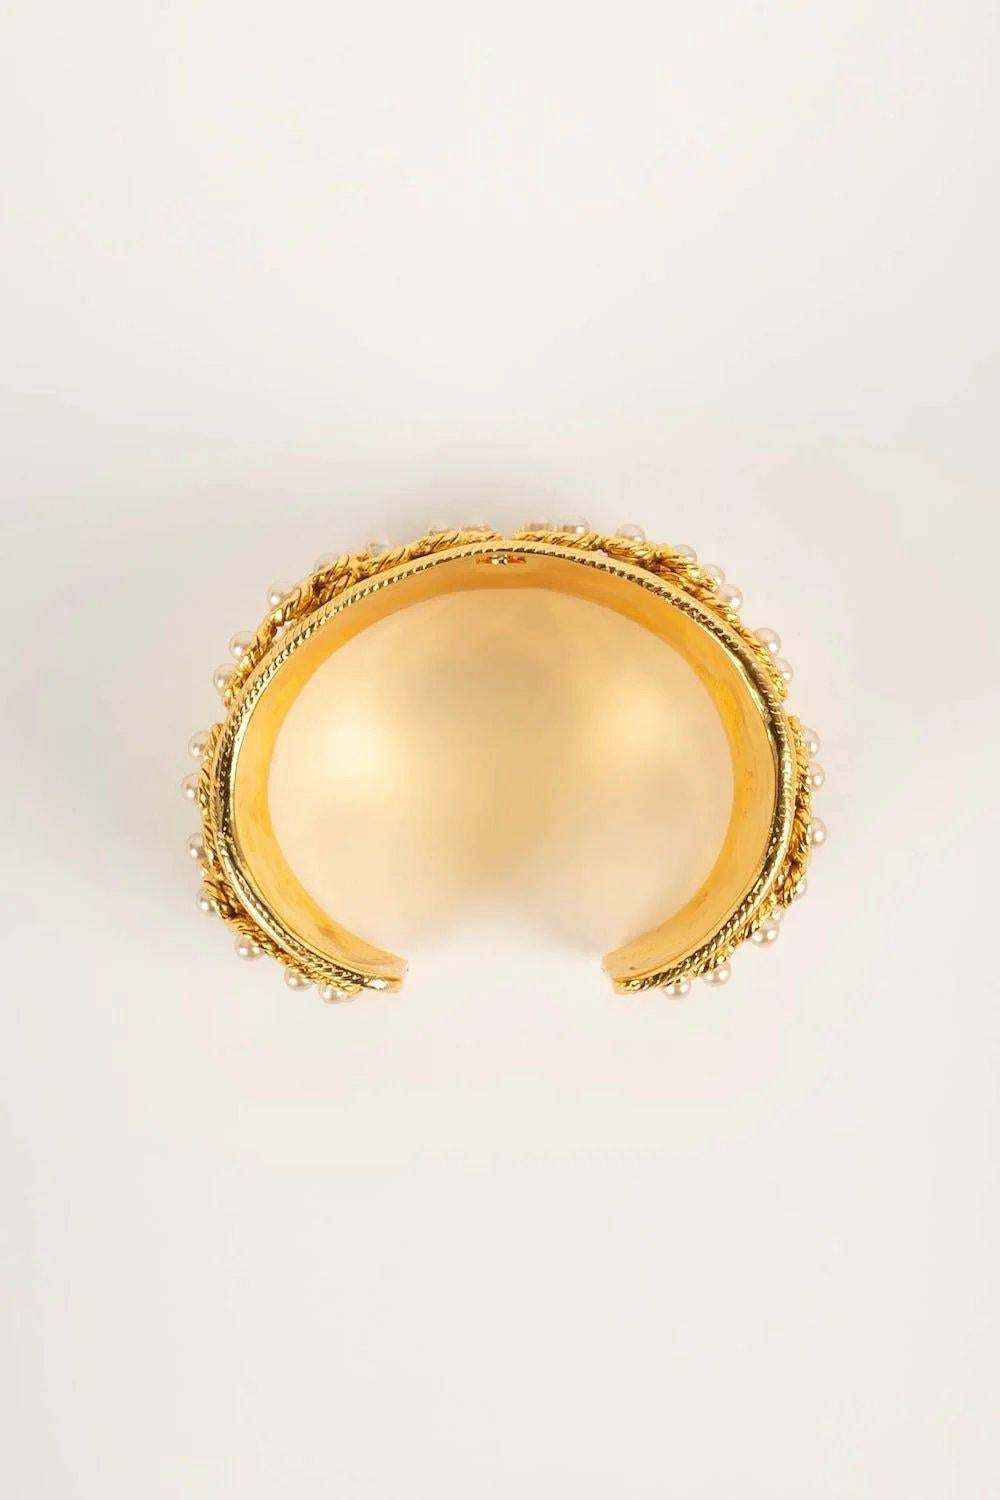 Chanel Cuff Bracelet in Gilded Metal and Cabochons For Sale 2